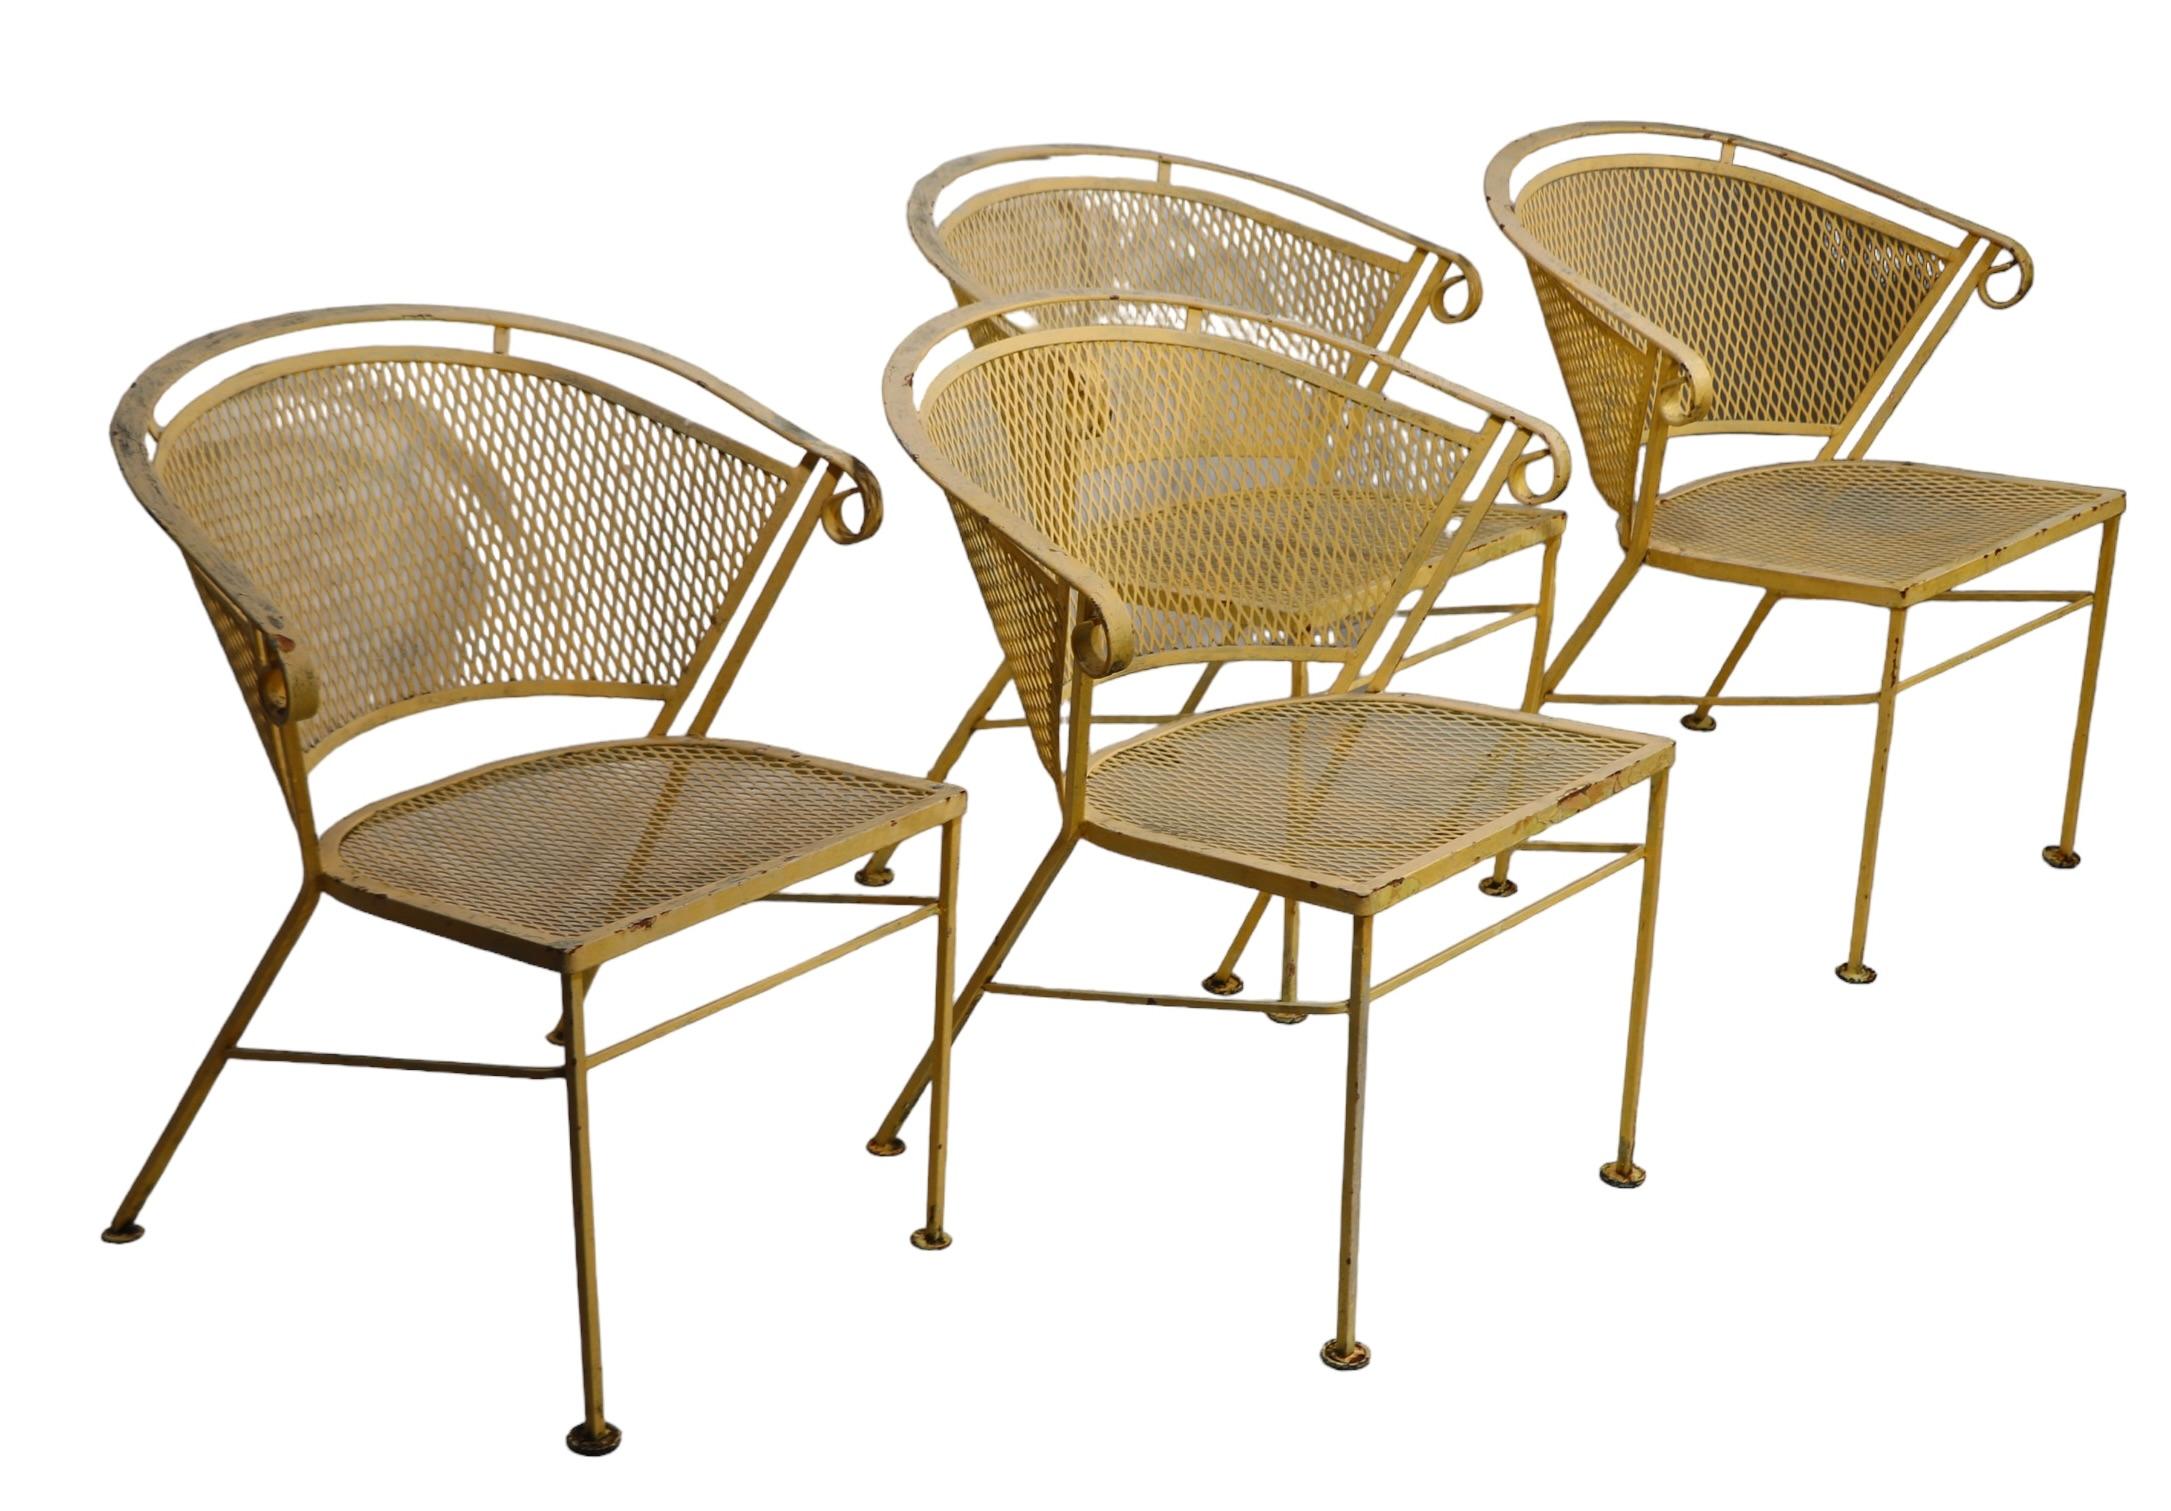 Set of four Mid Century garden, patio, poolside dining chairs, made by the Woodard Furniture Company, circa 1950/60's. The chairs are all structurally sound and sturdy, they are currently in later, but not new, yellow paint surface. Please view our